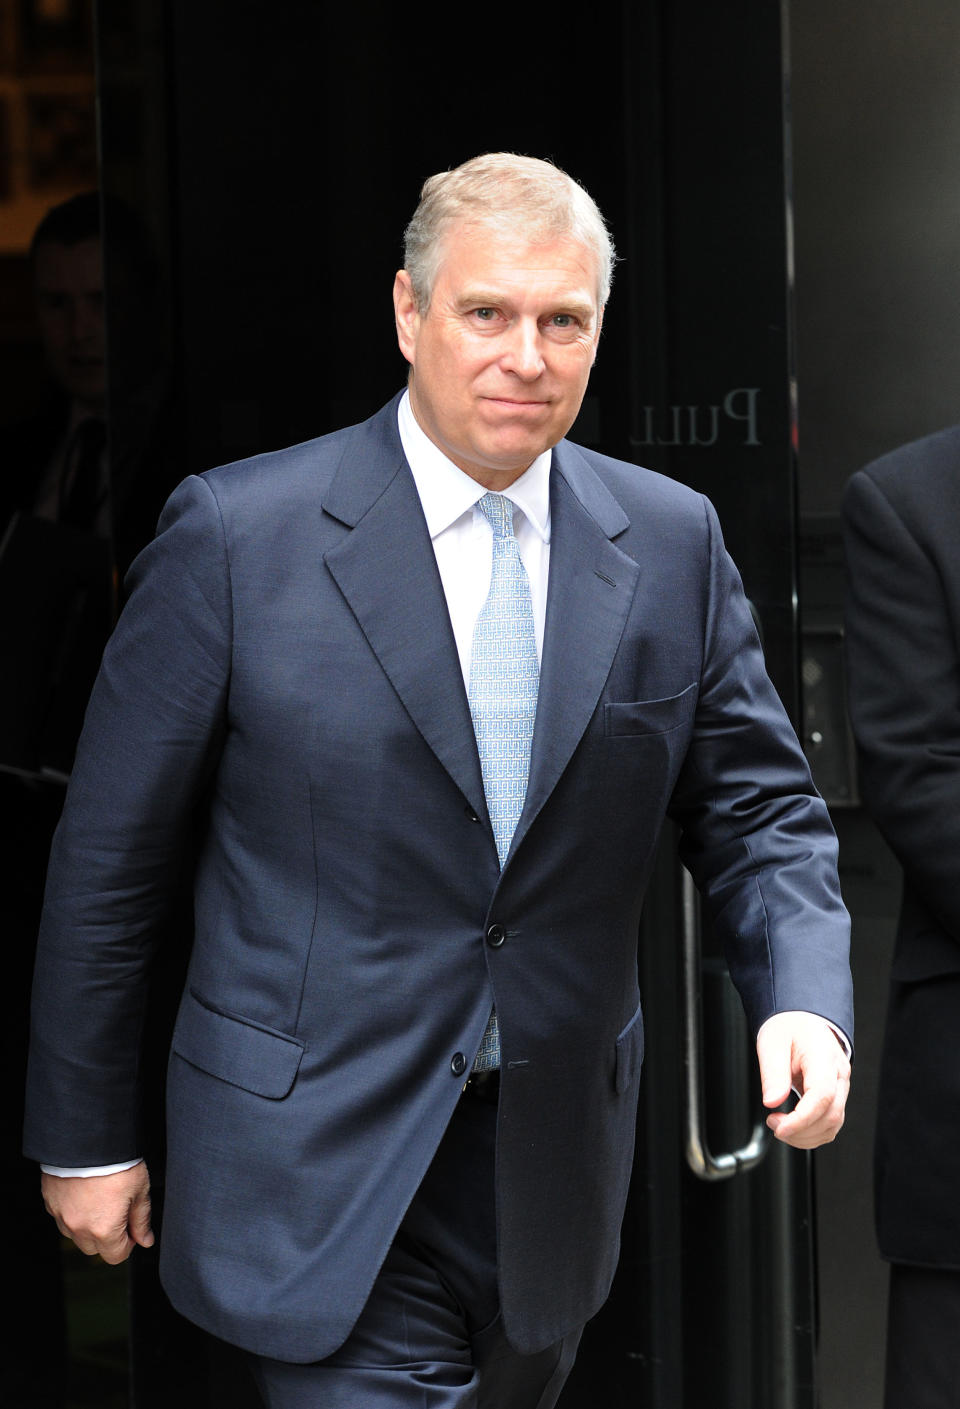 Prince Andrew in blue suit and tie